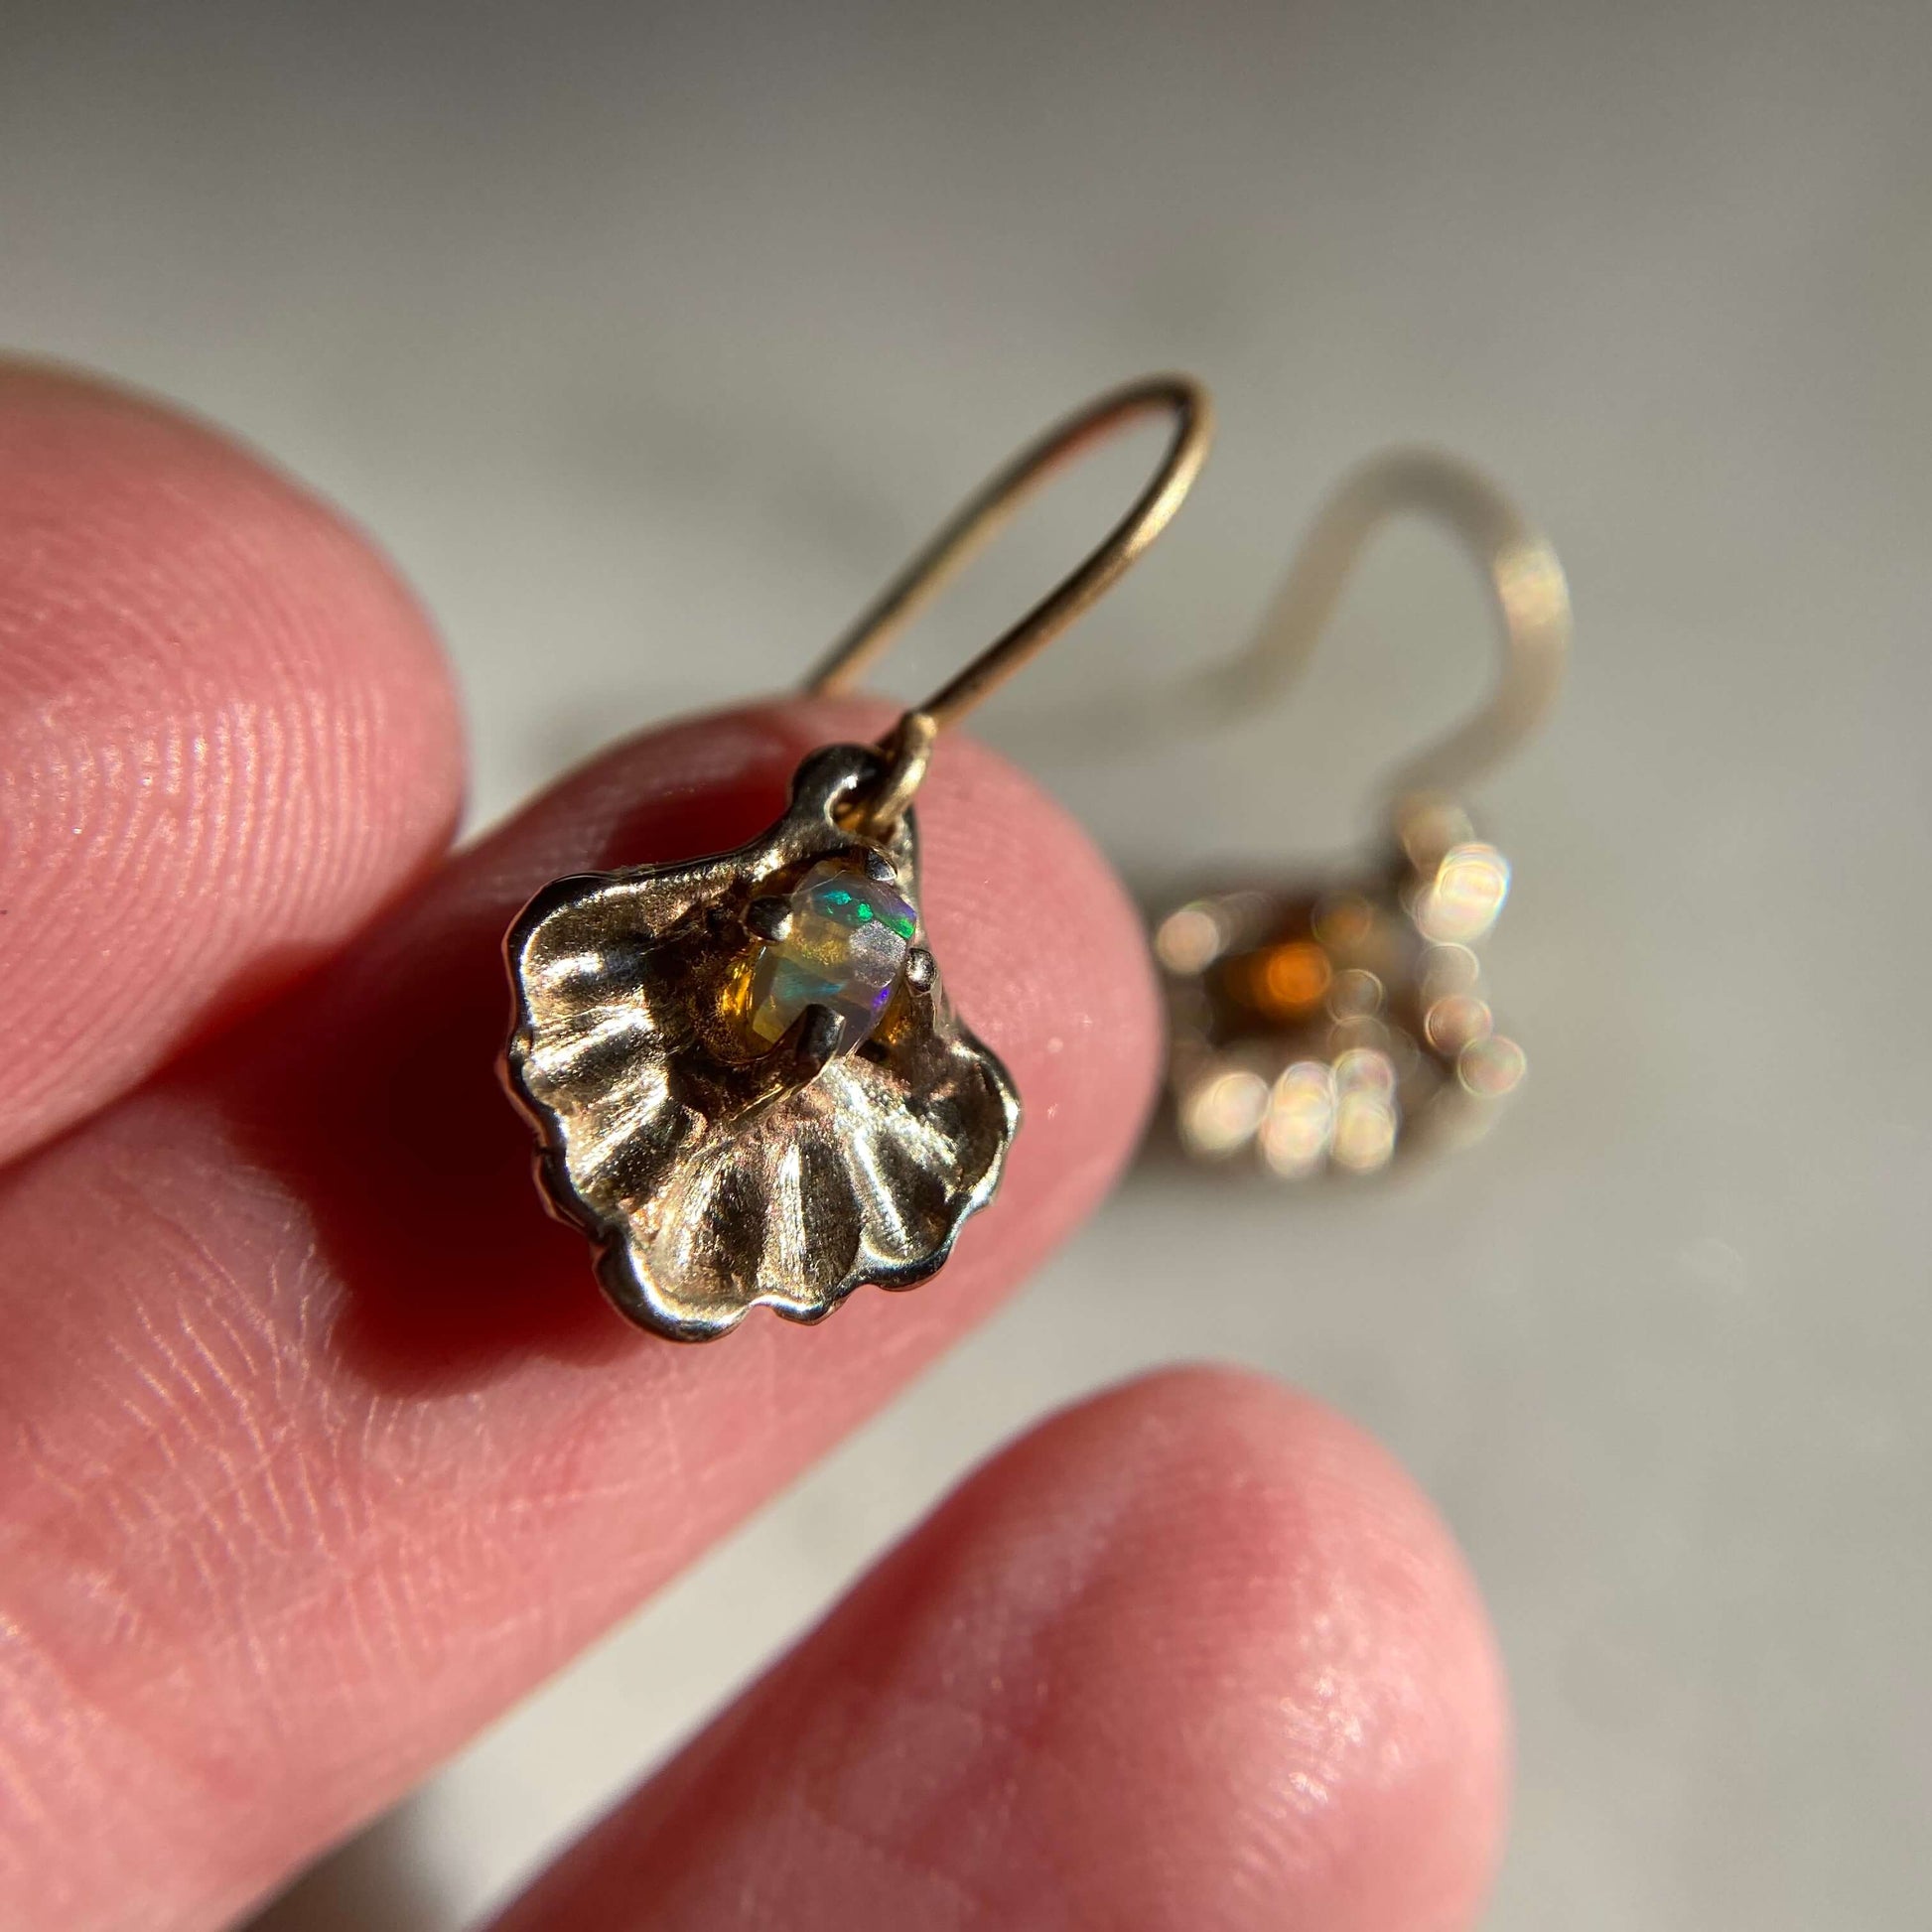 Oyster shell earrings containing a small opal "pearl", cast in gold tone bronze by Iron Oxide Designs, held on a fingertip to show scale